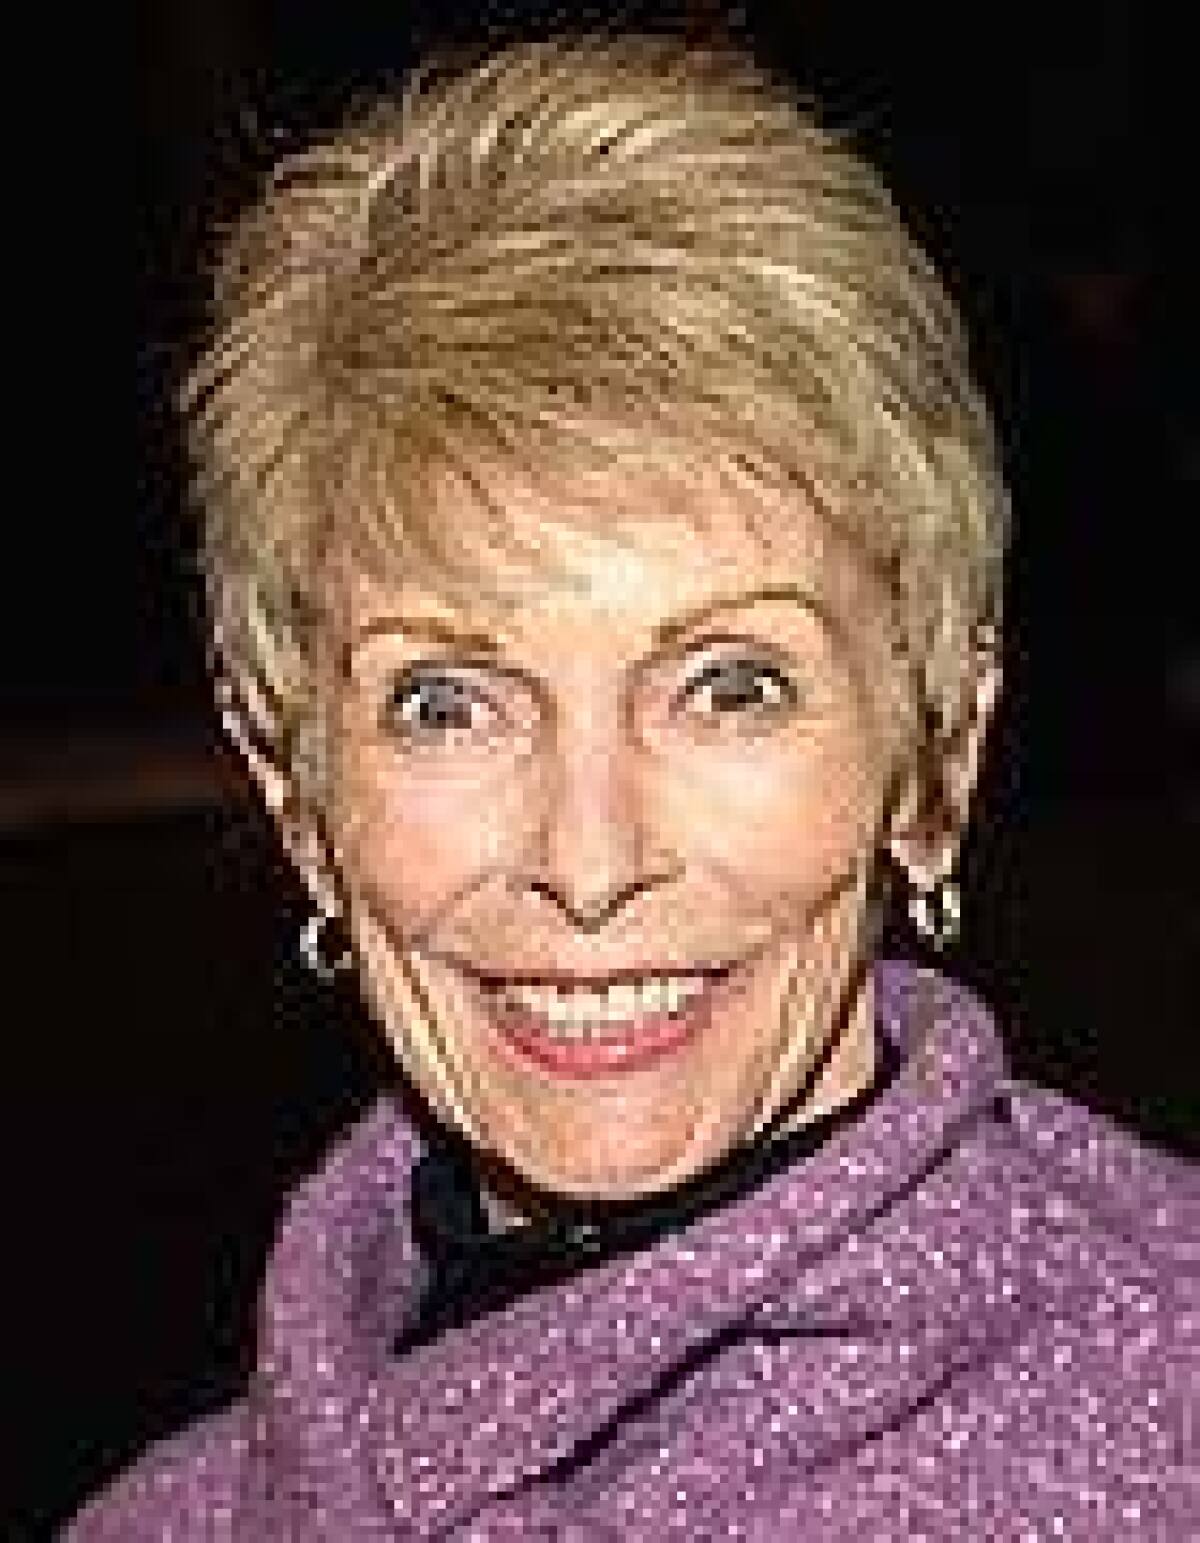 Actress Janet Leigh attends the premiere of "A Mighty Wind" at the Director's Guild of America on April 14, 2003 in Hollywood, California.